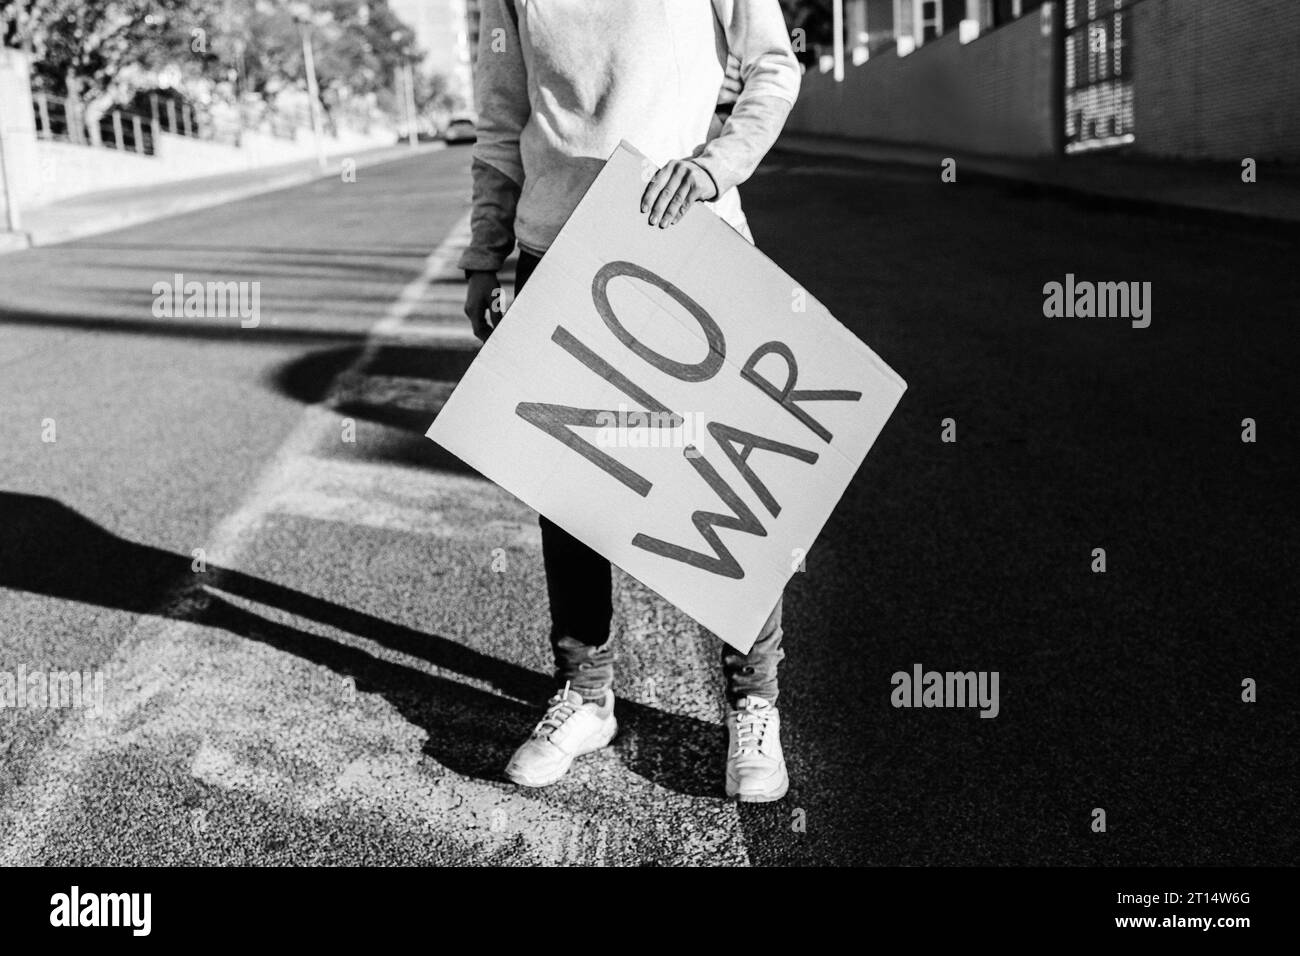 Stop war protest - People on street fighting for peace and human rights - Black and white editing Stock Photo